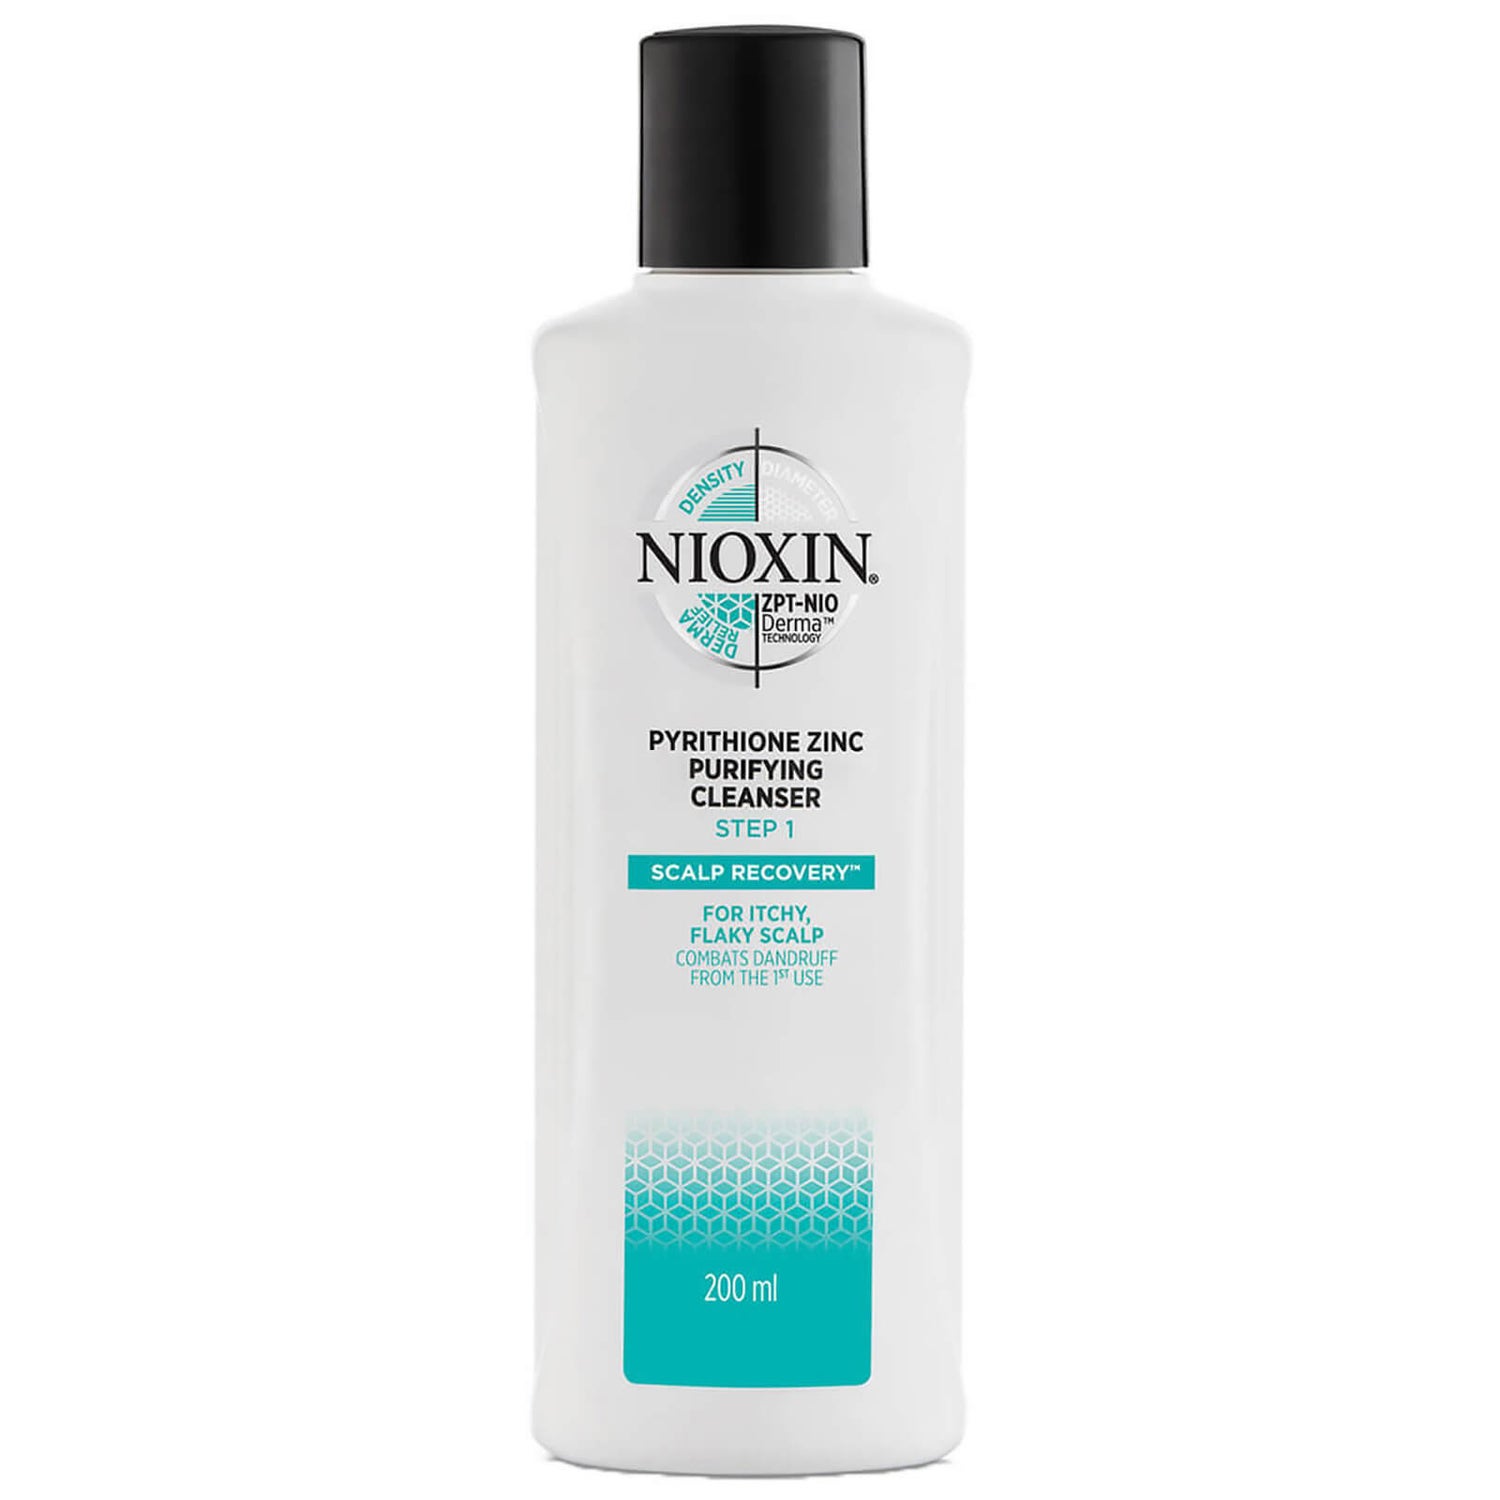 NIOXIN Scalp Recovery Anti-Dandruff Purifying Cleanser for Itchy, Flaky Scalp -shampoo, 200 ml